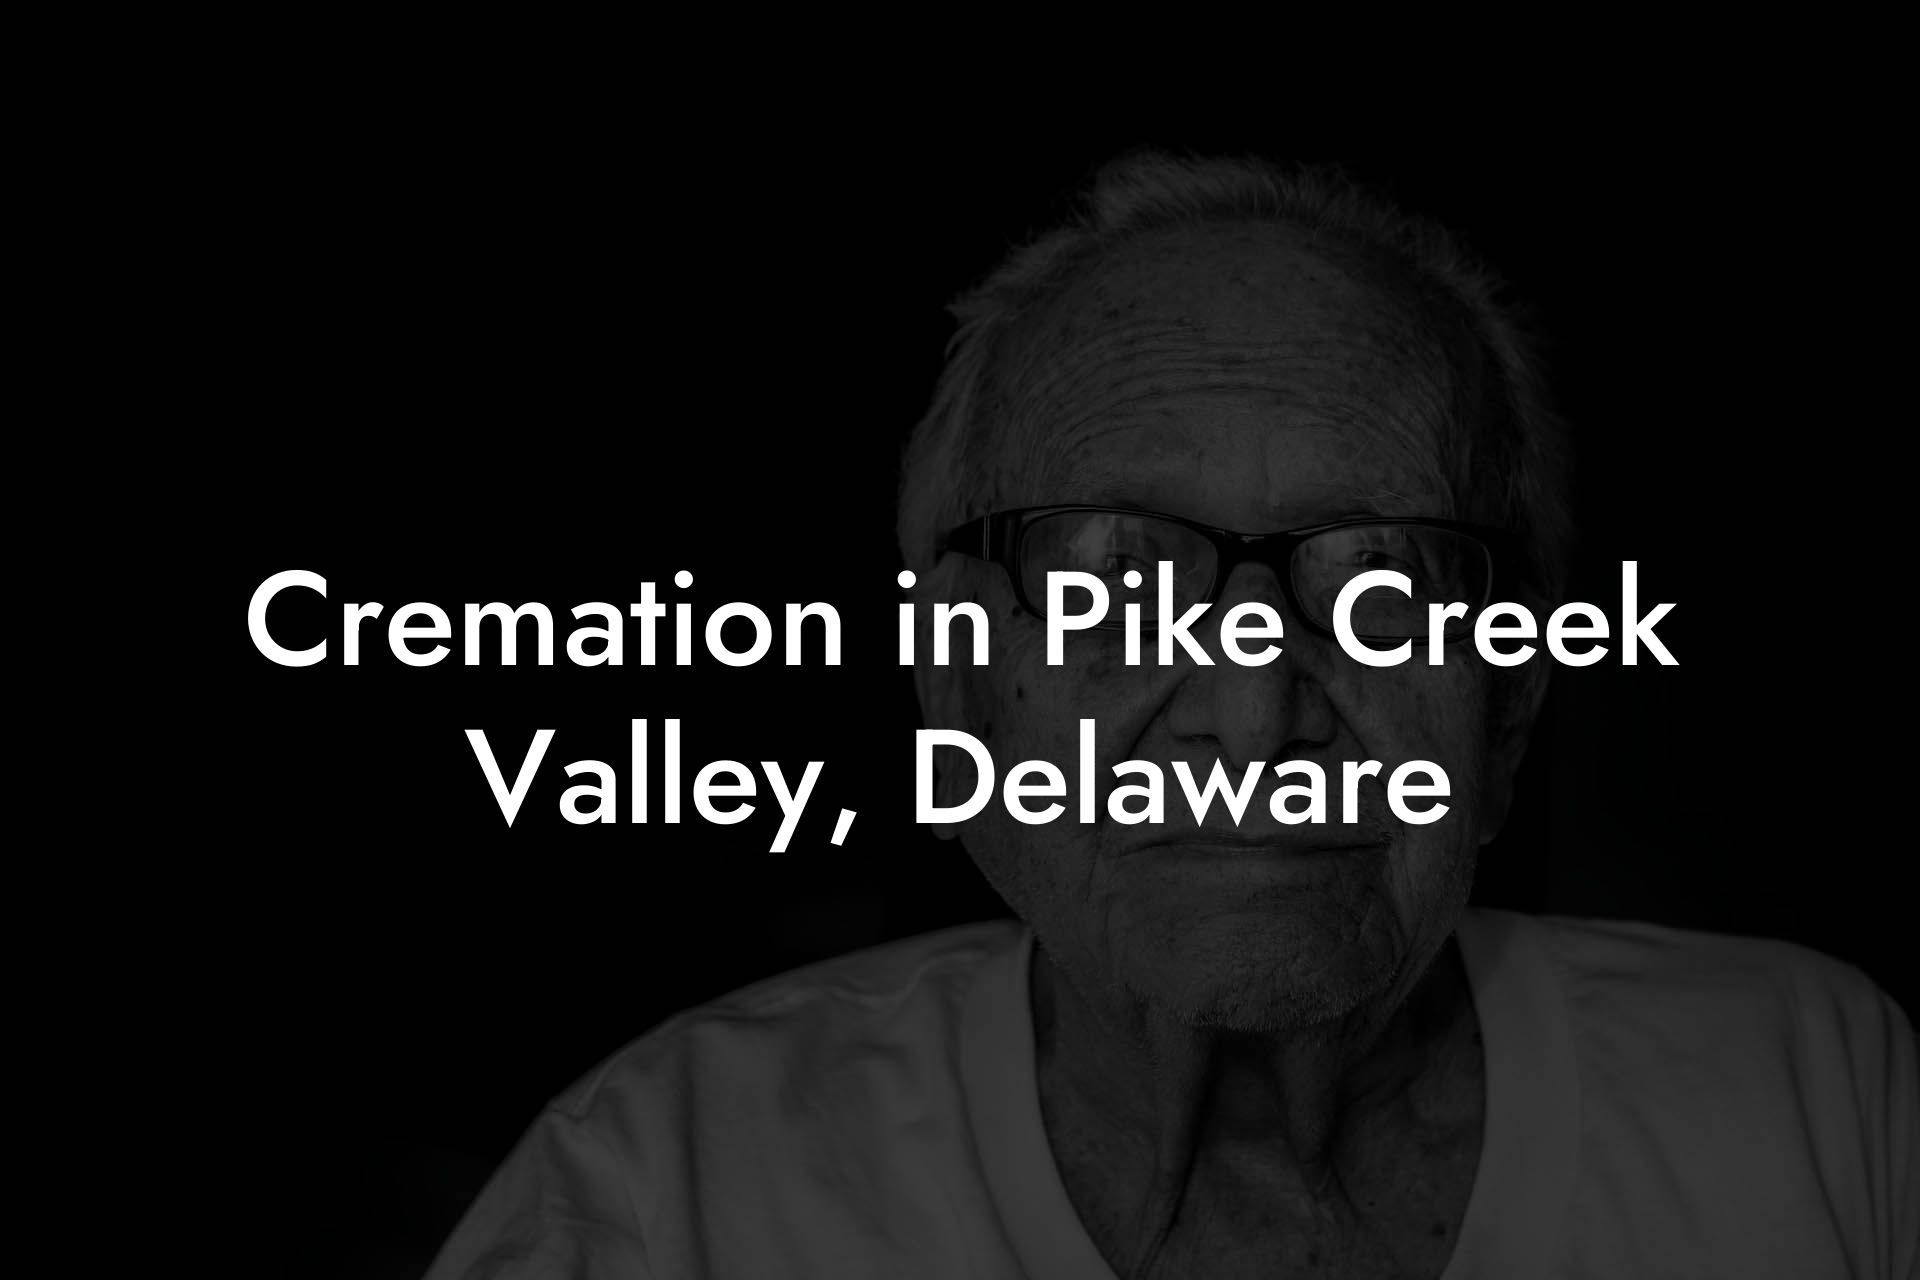 Cremation in Pike Creek Valley, Delaware